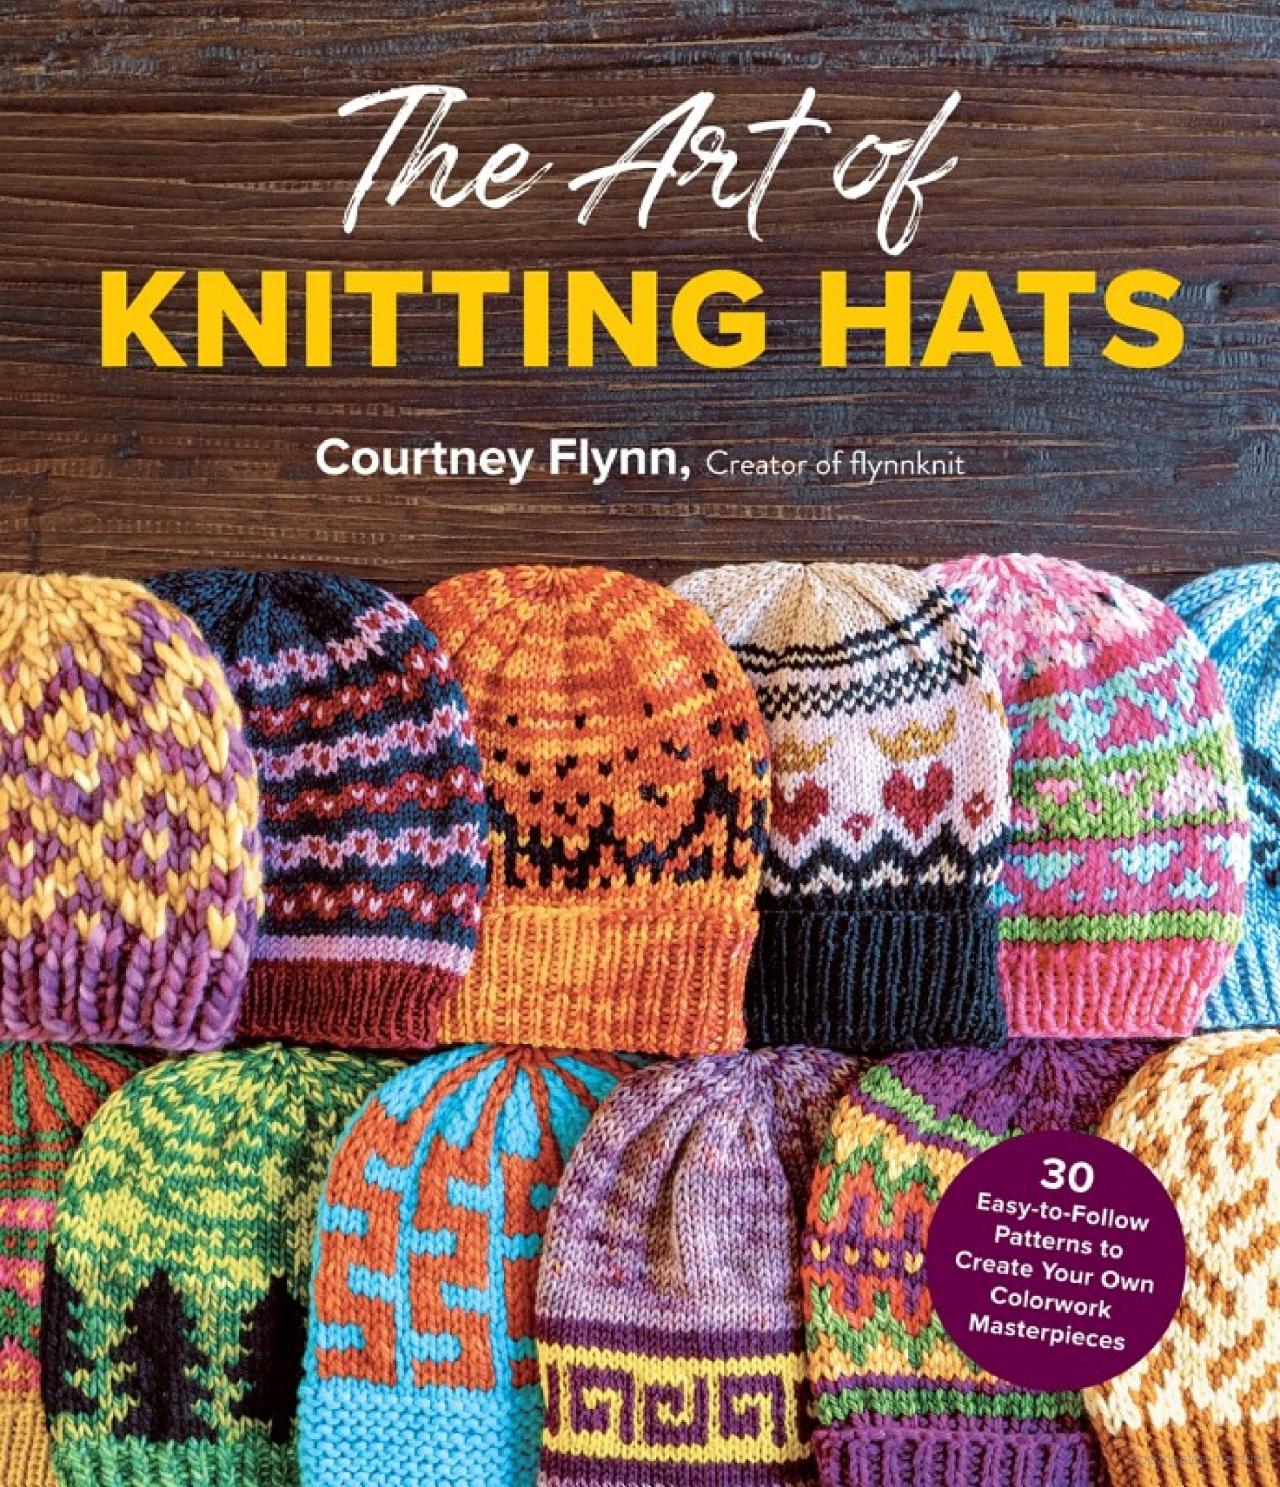 The Art of Knitting Hats: 30 Easy-to-Follow Patterns